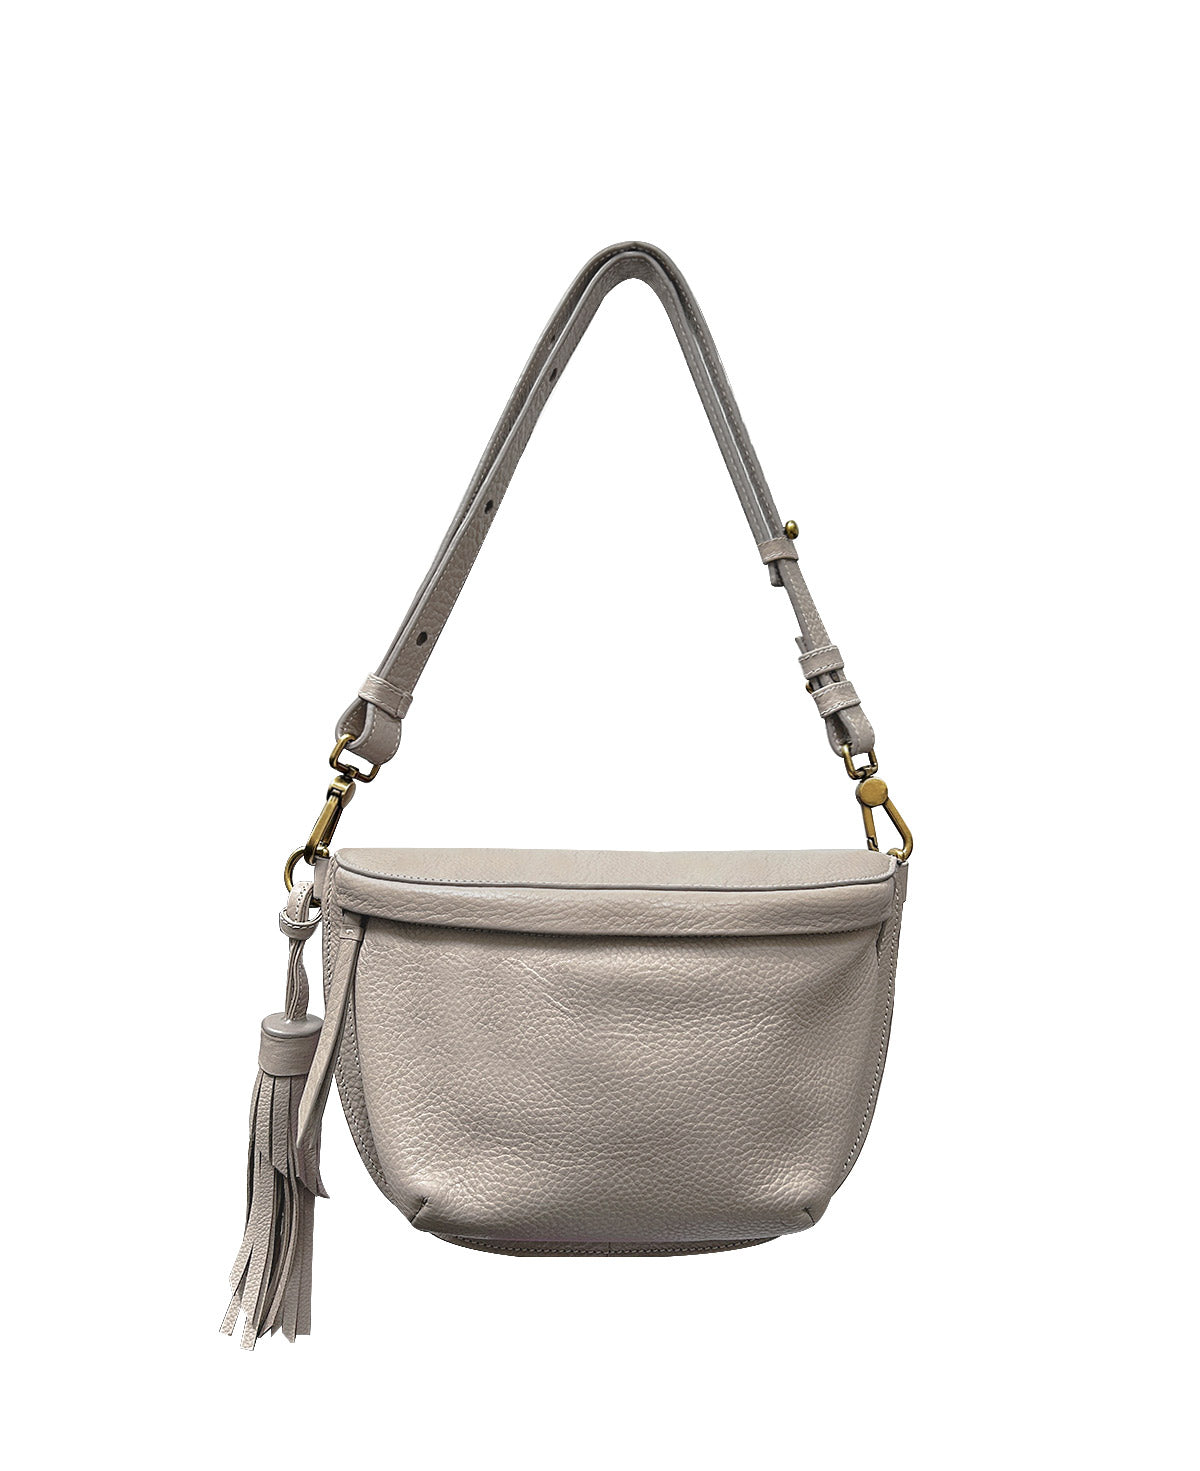 Fem Taupe Leather Fanny pack - Crossbody